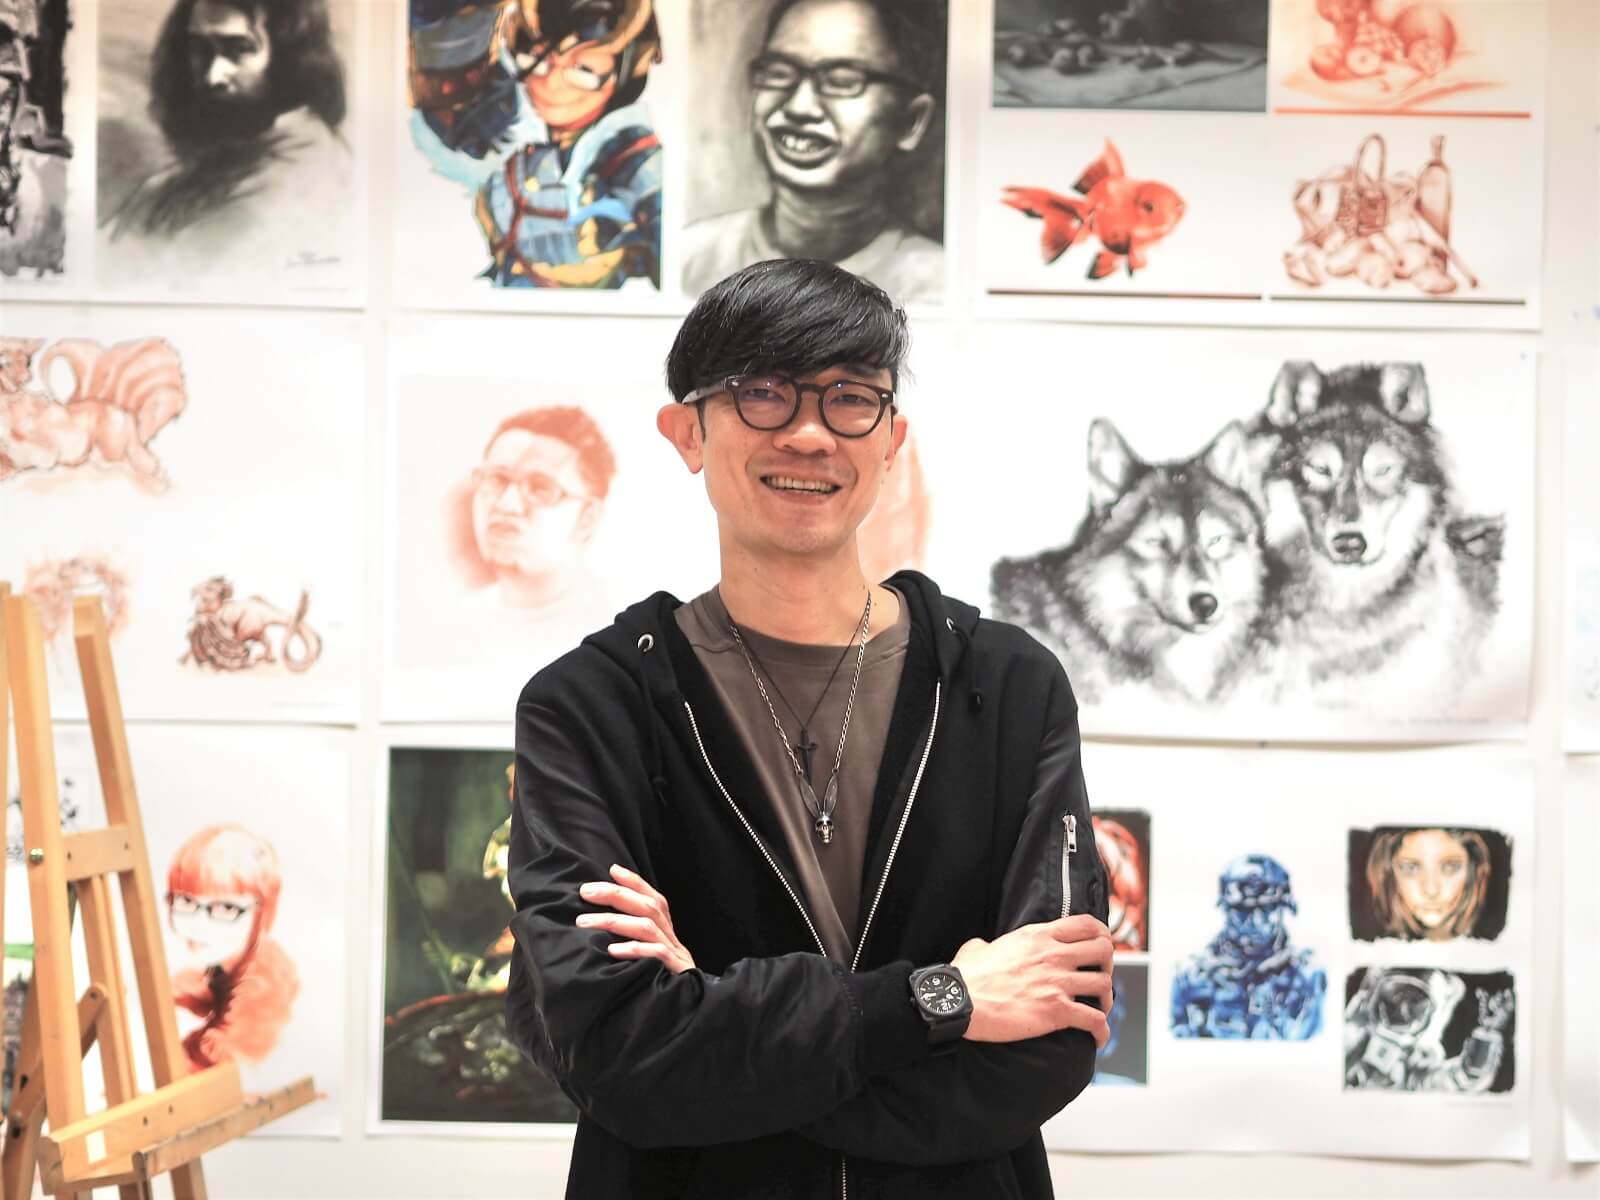 DigiPen Department Chair Dominic Chang stands in front of a wall full of student art work